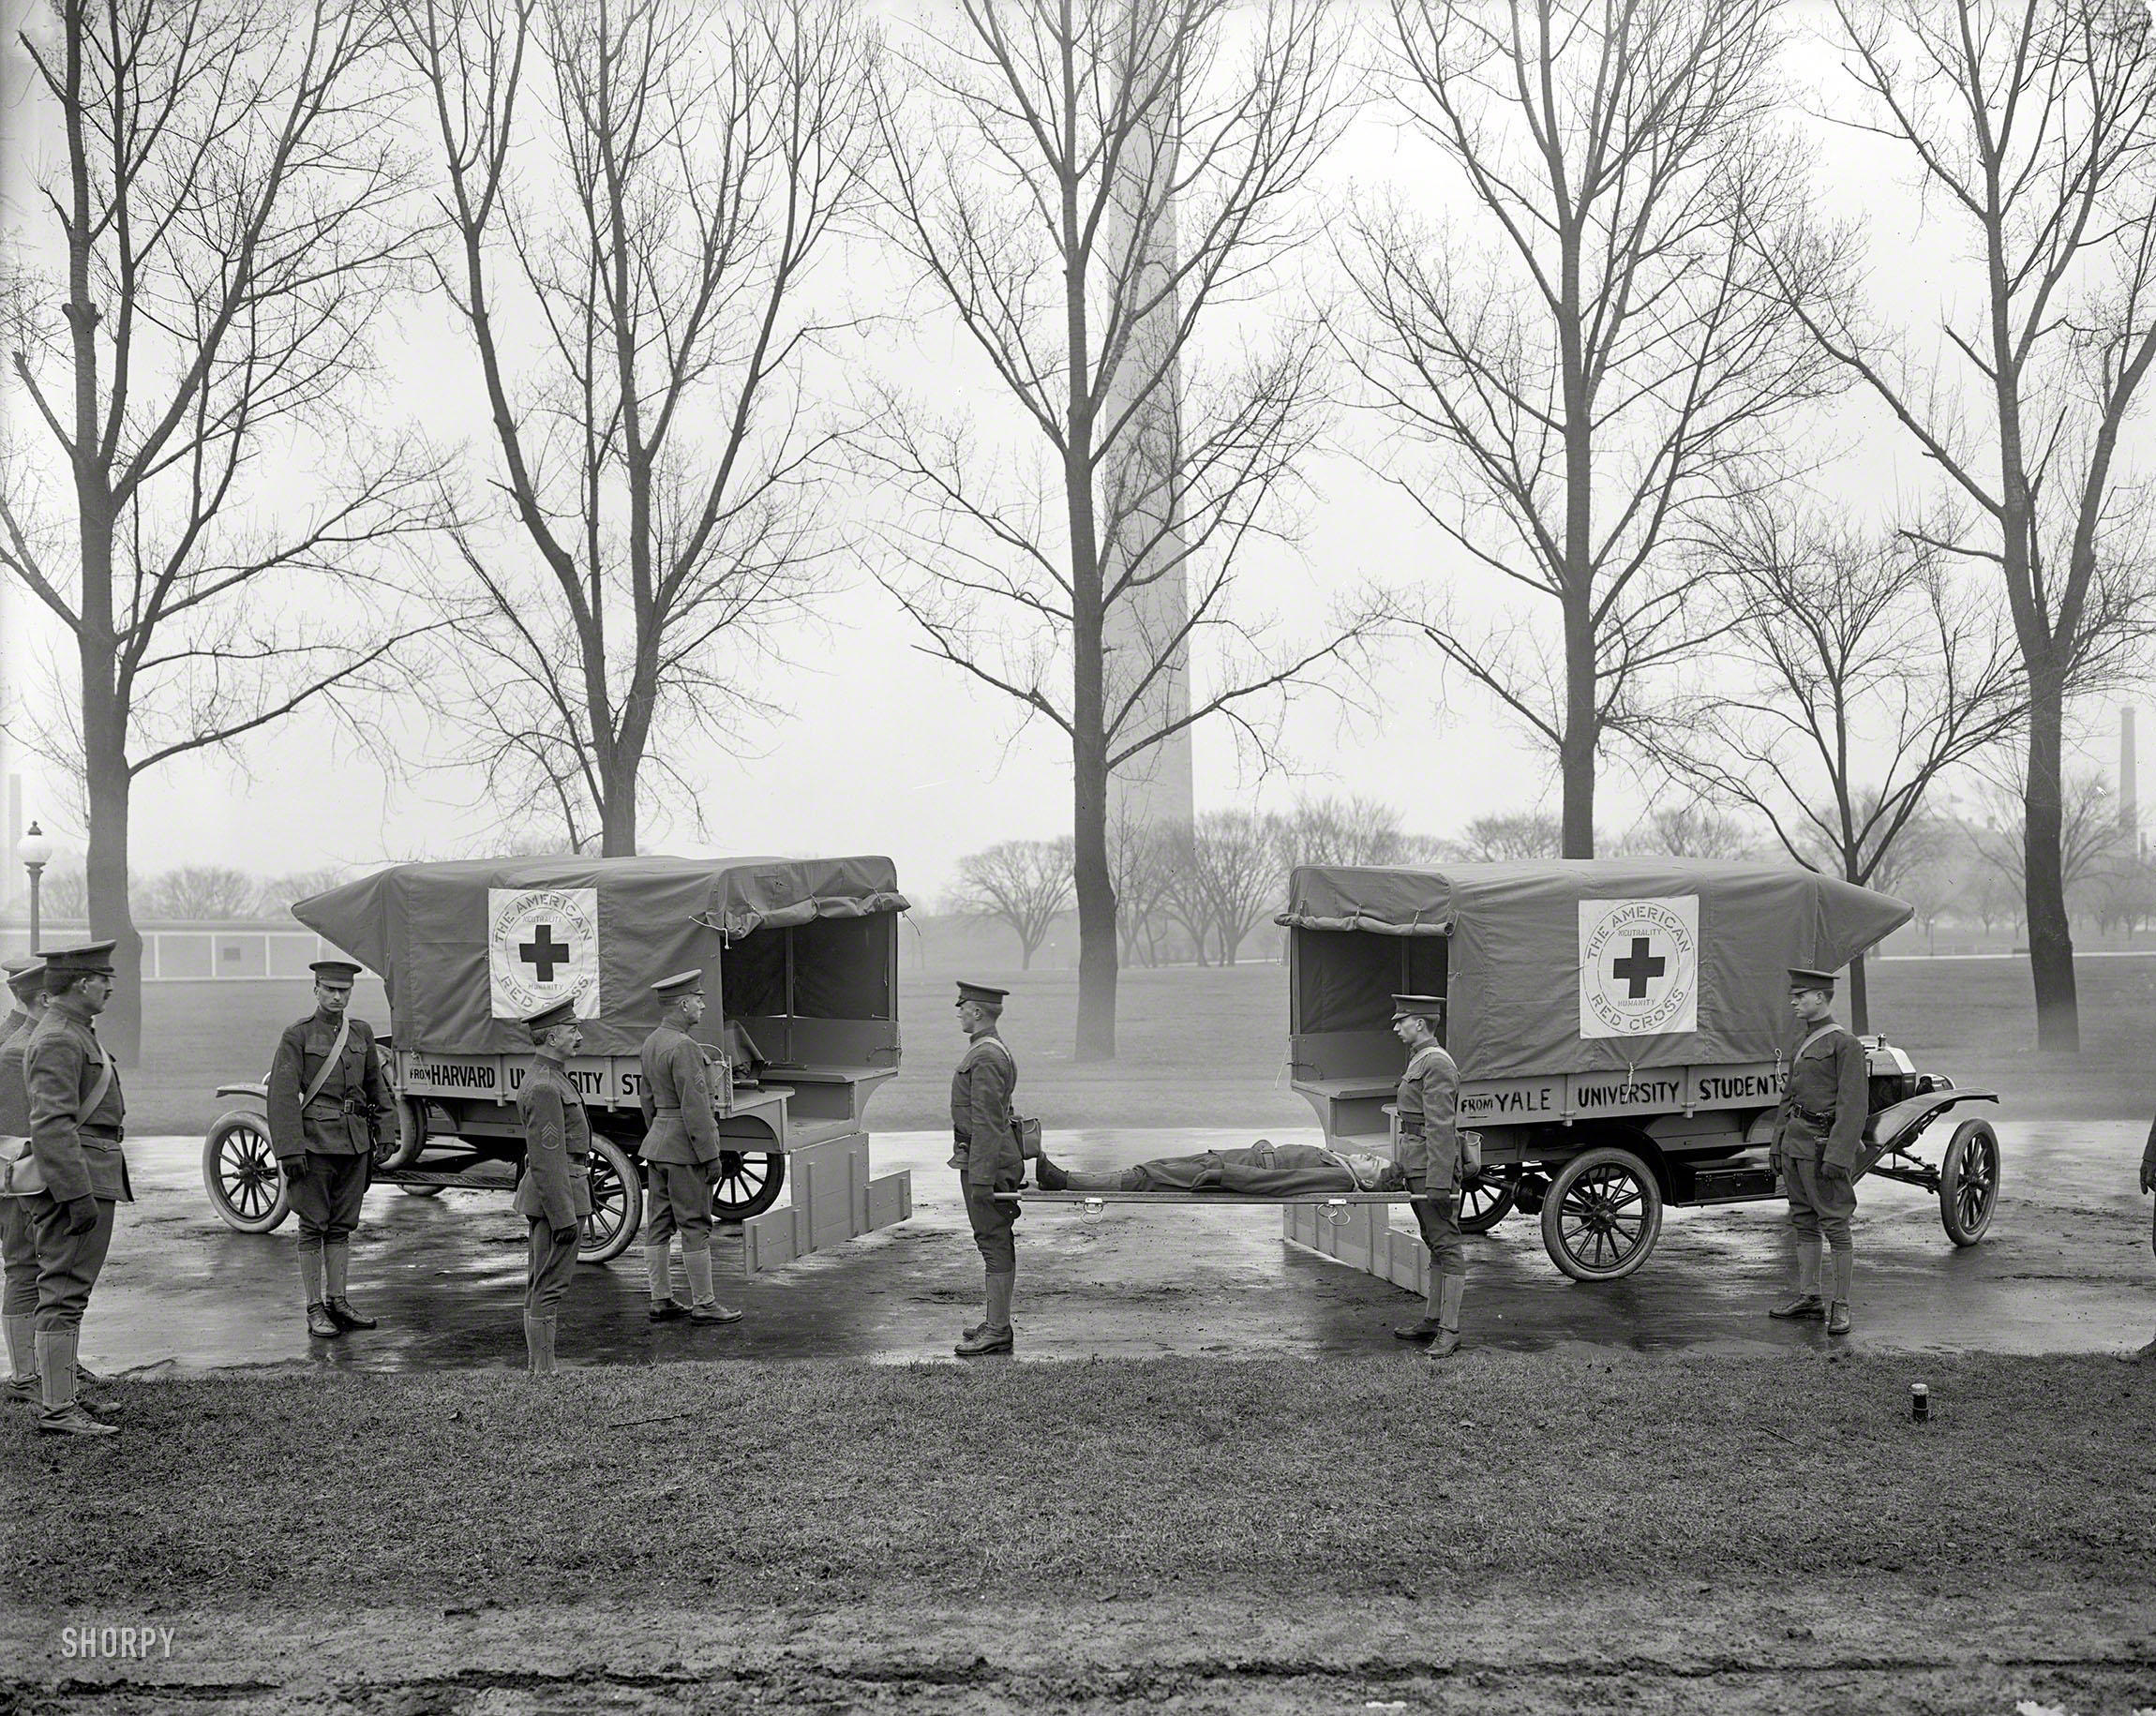 Circa 1919. "Red Cross ambulances at Washington Monument." Courtesy of Yale and Harvard, which had the better letterer. 8x10 glass negative. View full size.